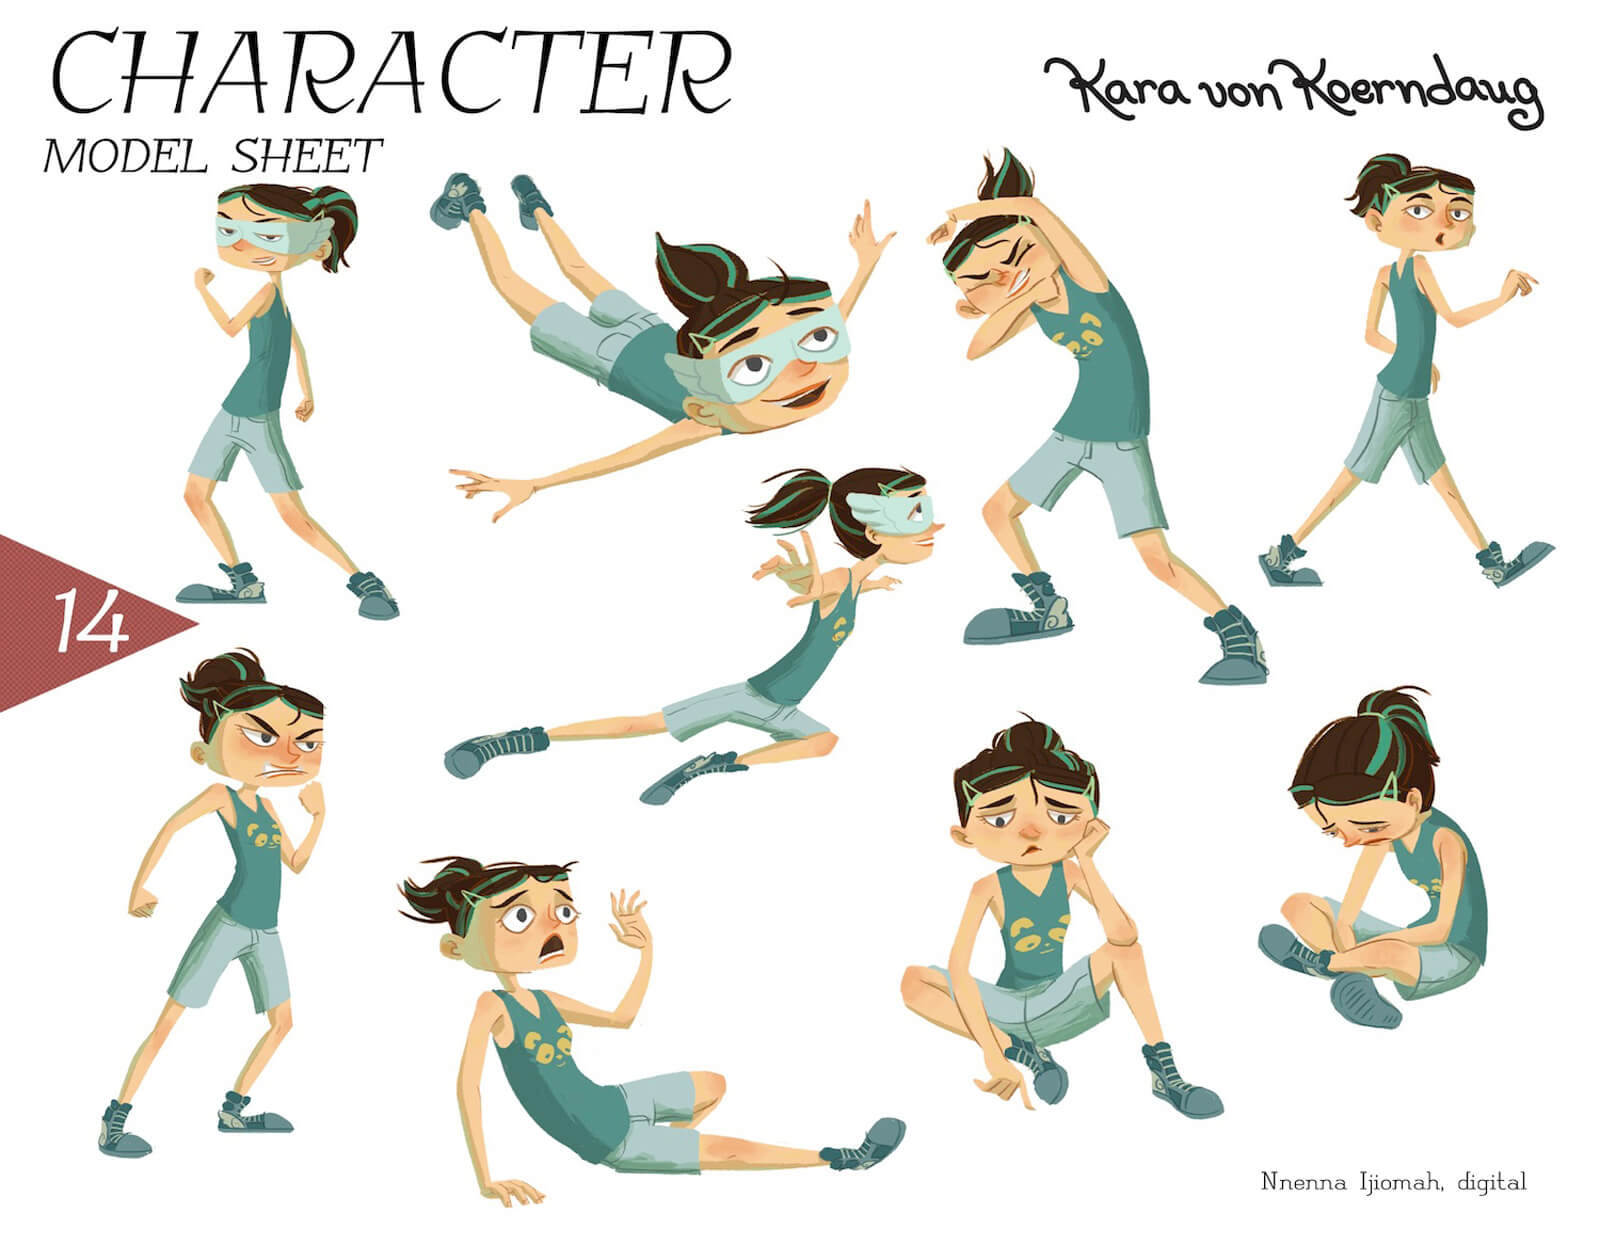 Model sheet for the character of Kara von Koerndaug, including actions like flying, walking, sitting, anger, and others